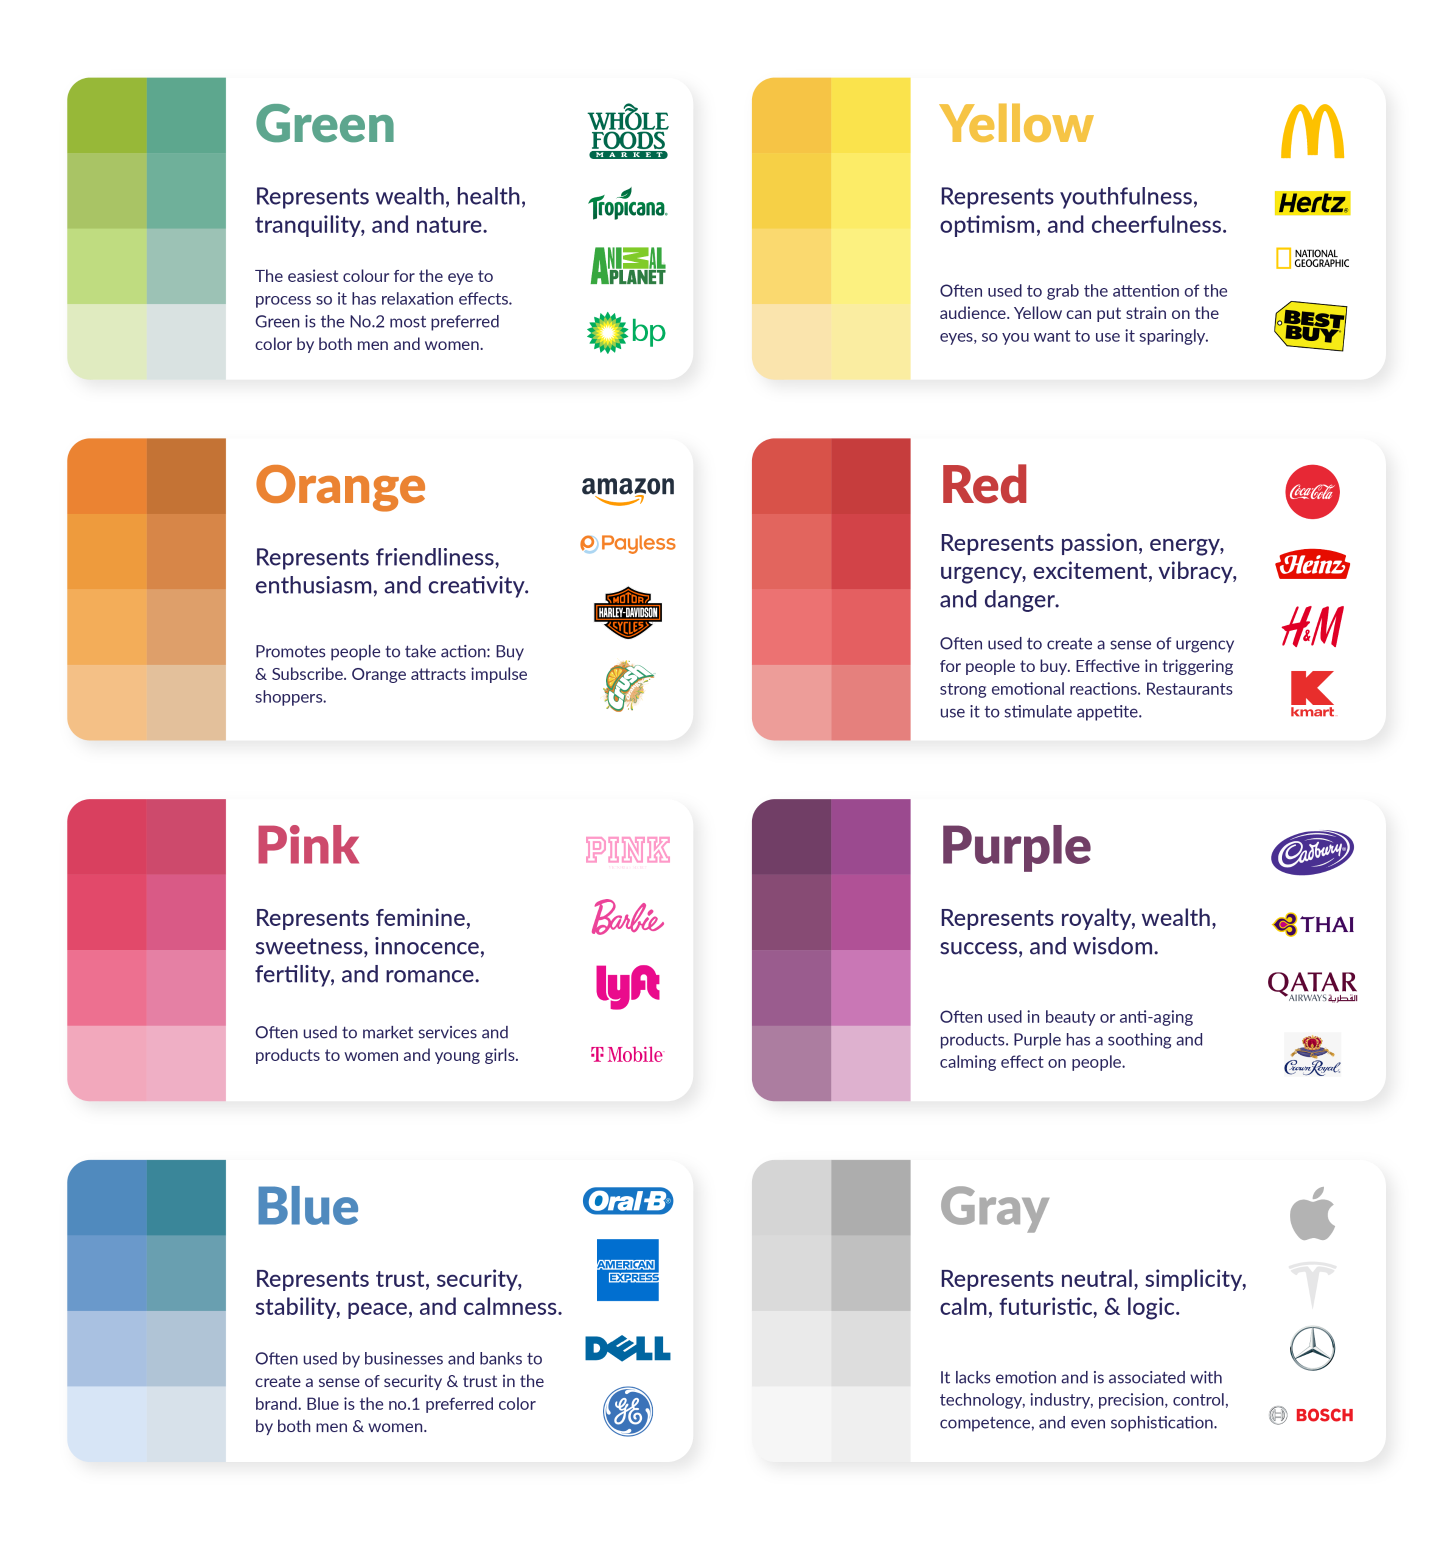 Graphic of different colors and logos for businesses with that color